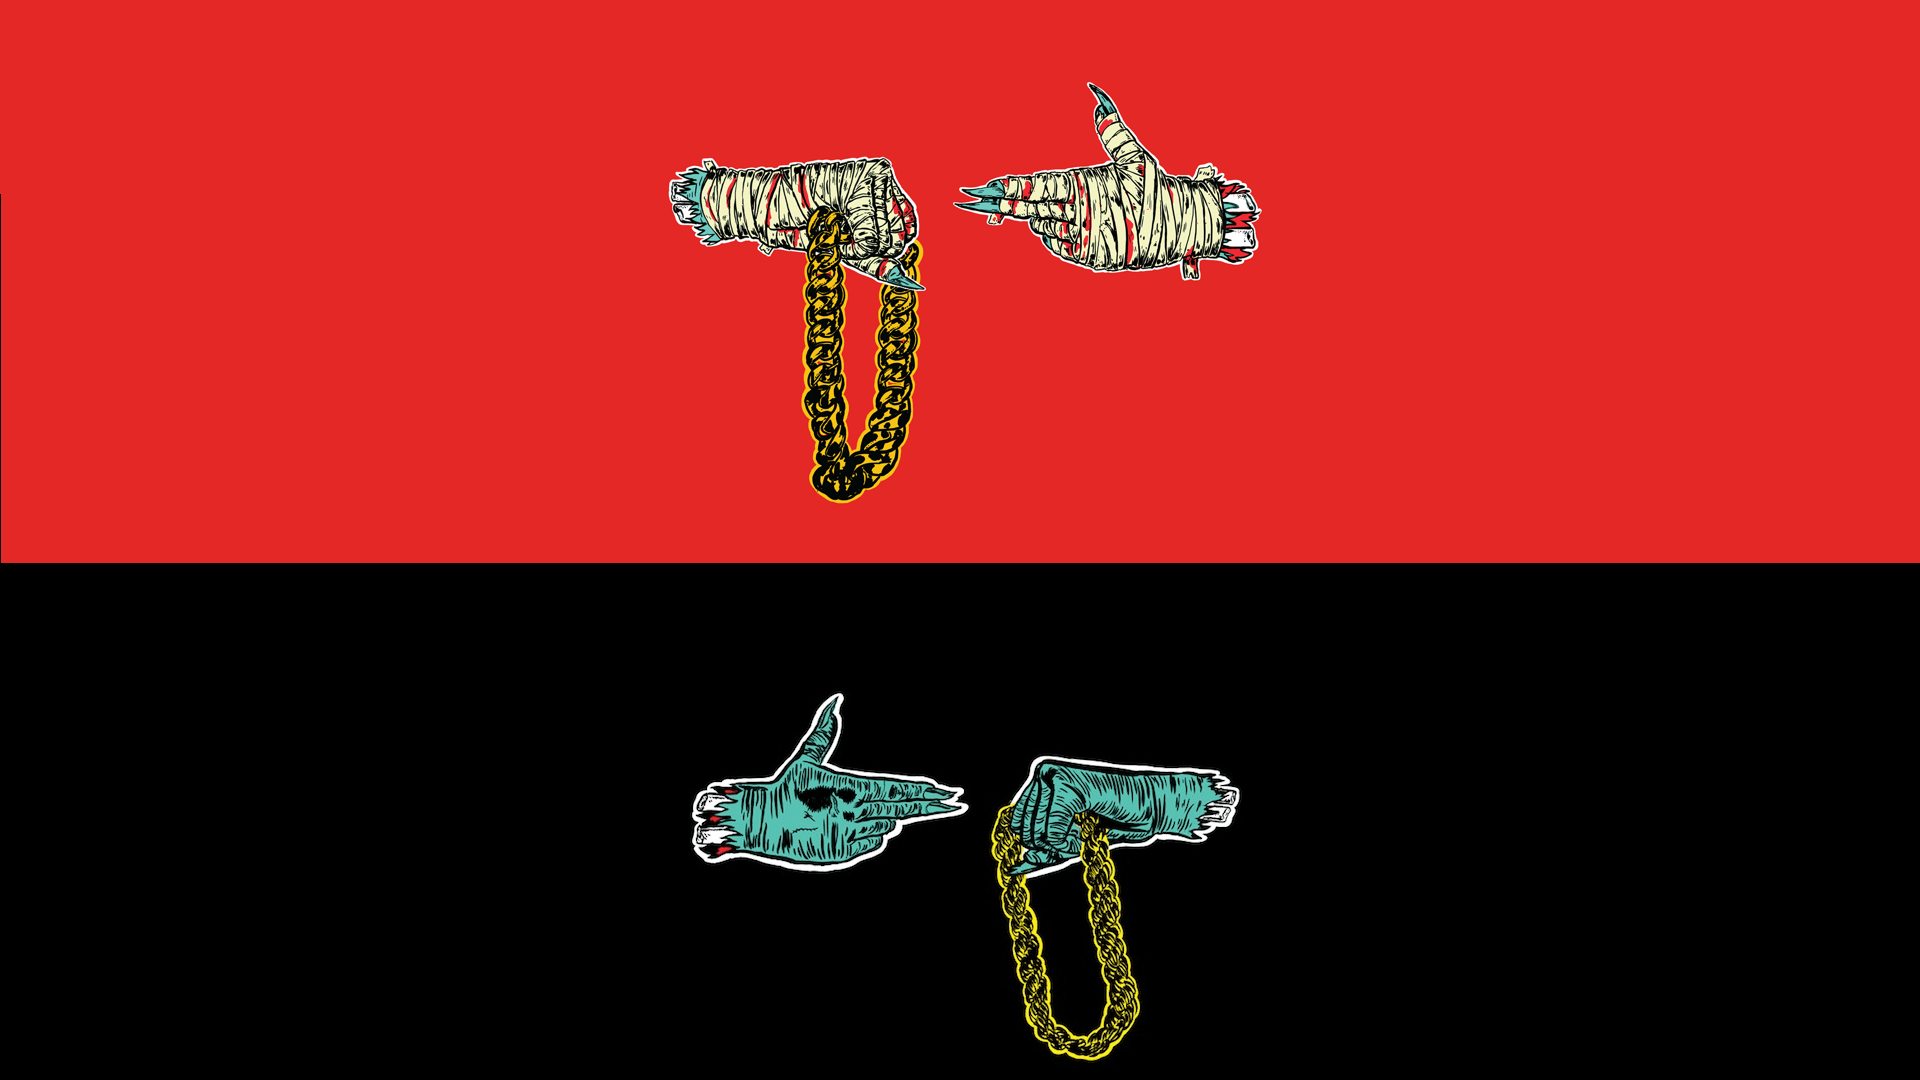 Made this Run the Jewels wallpaper for the new album 1920x1080